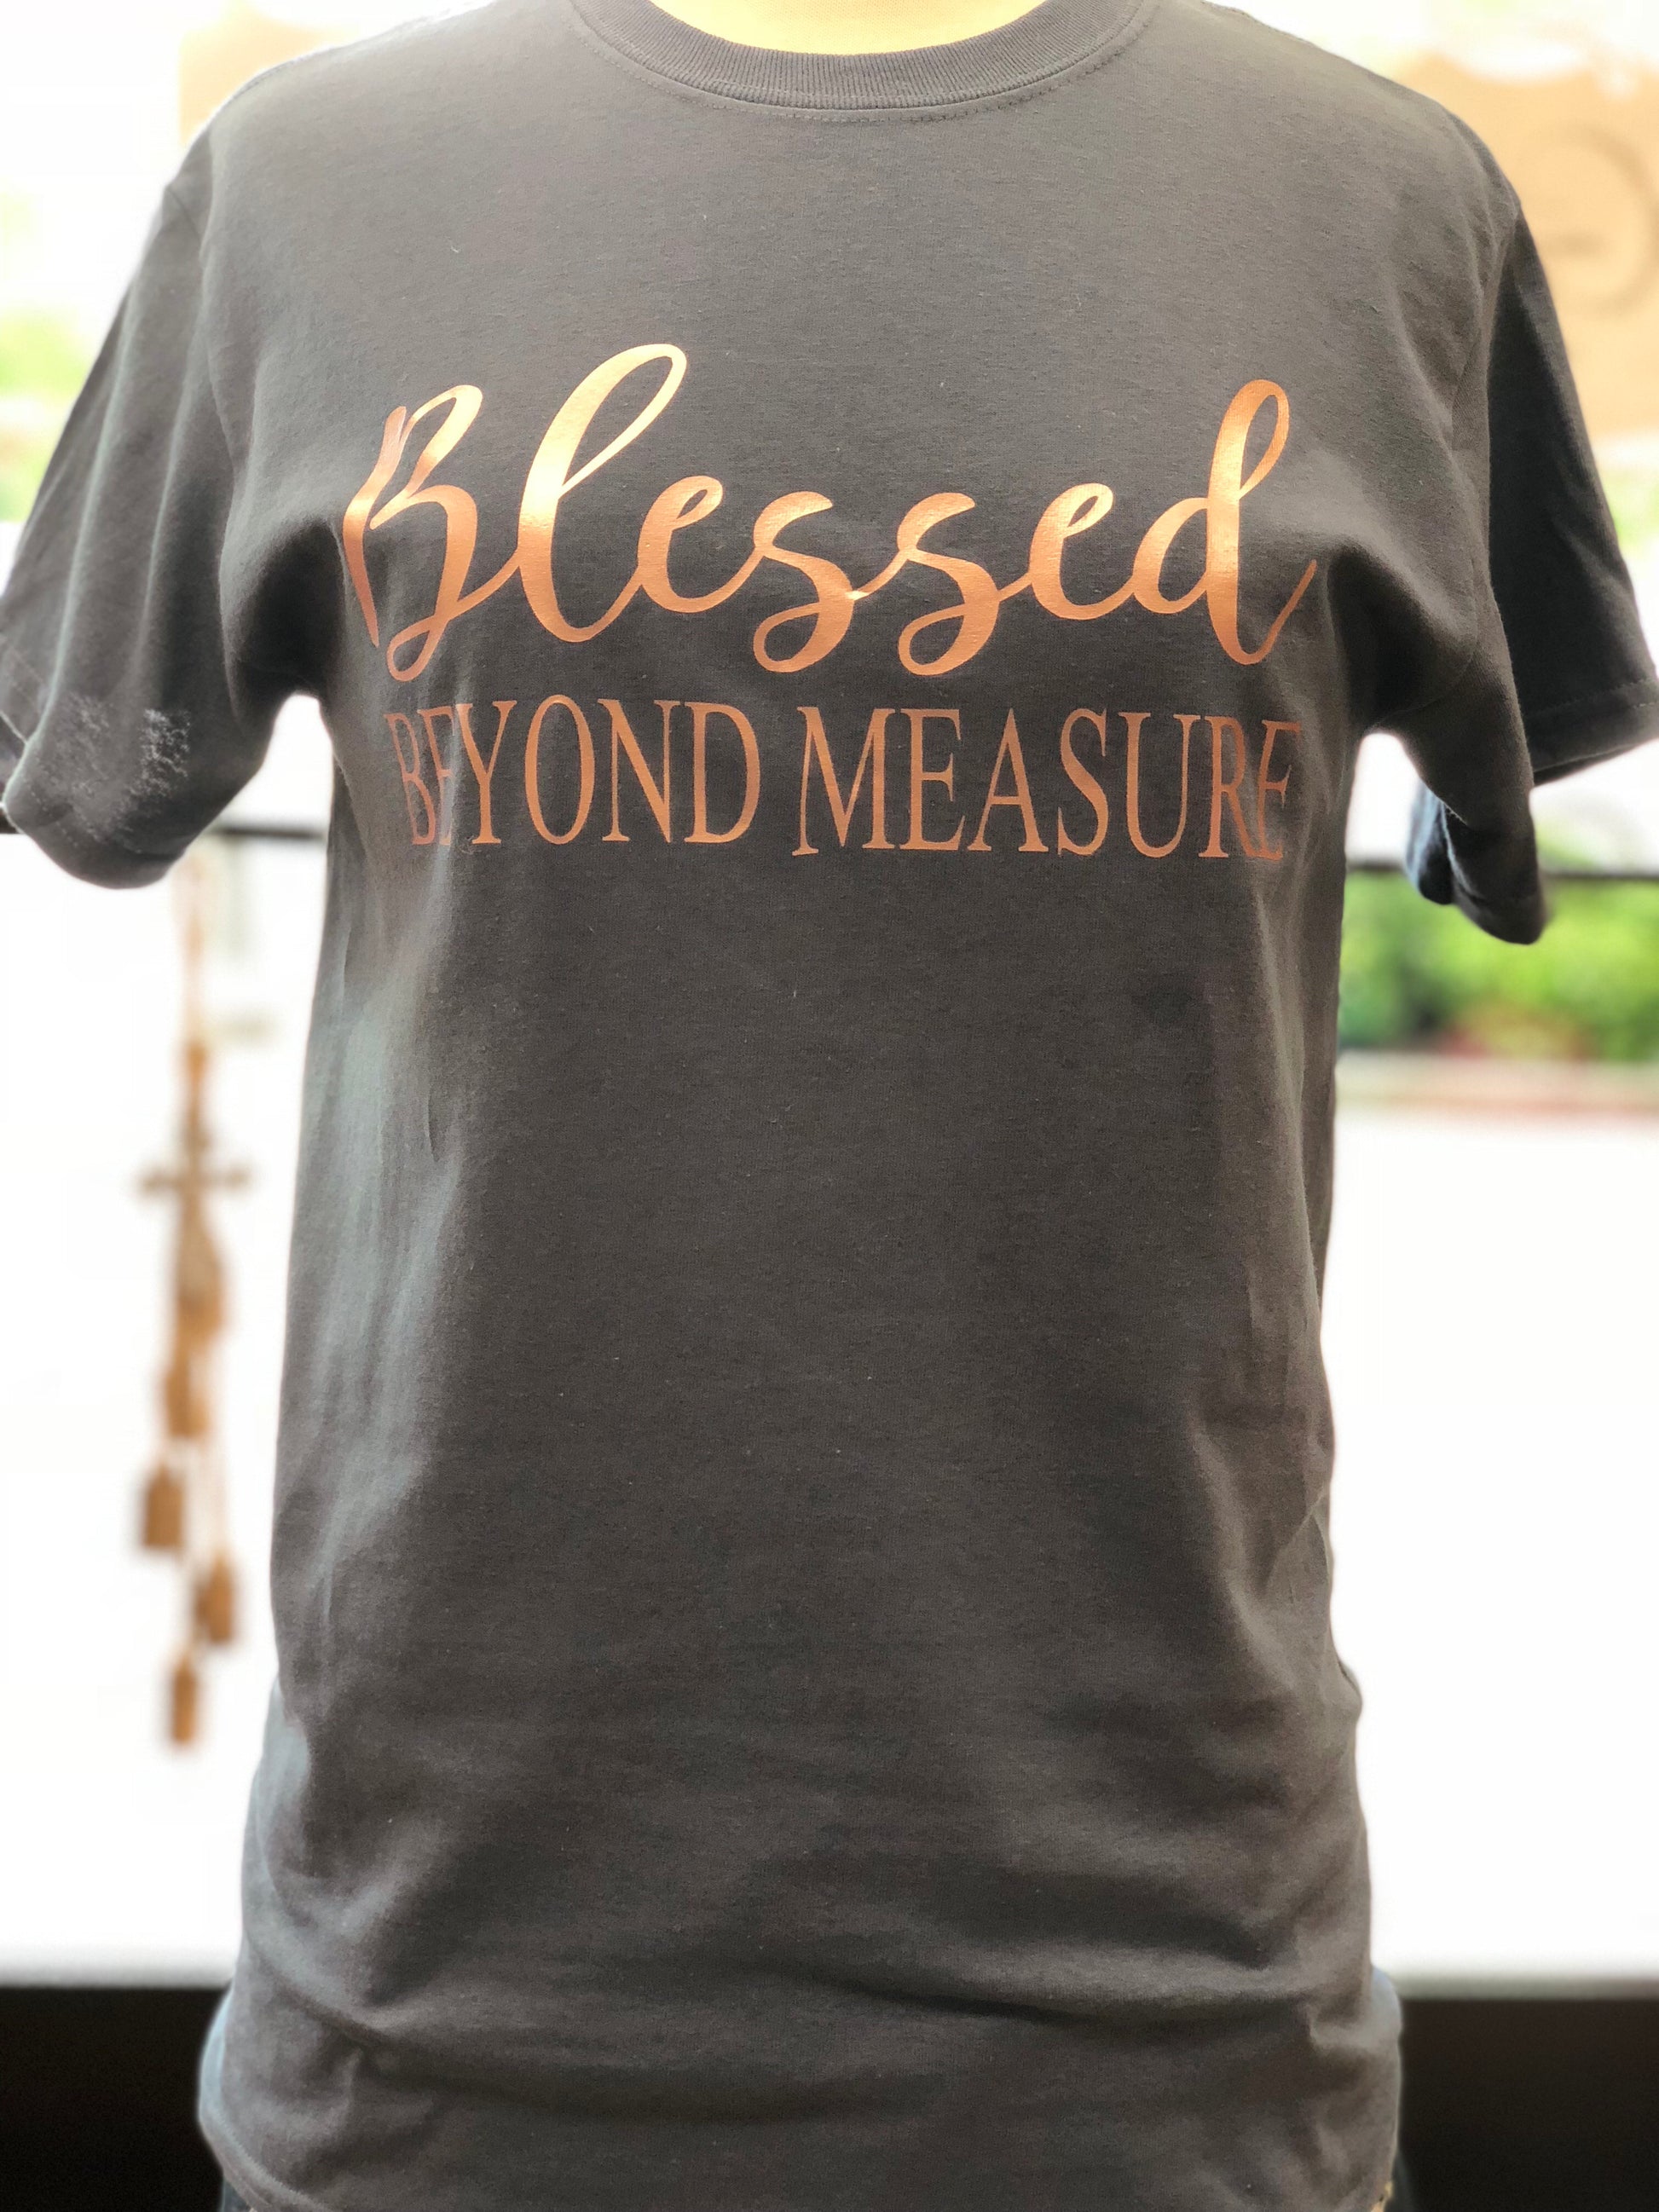 Blessed beyond measure - charcoal short sleeve tee - Southern Grace Creations